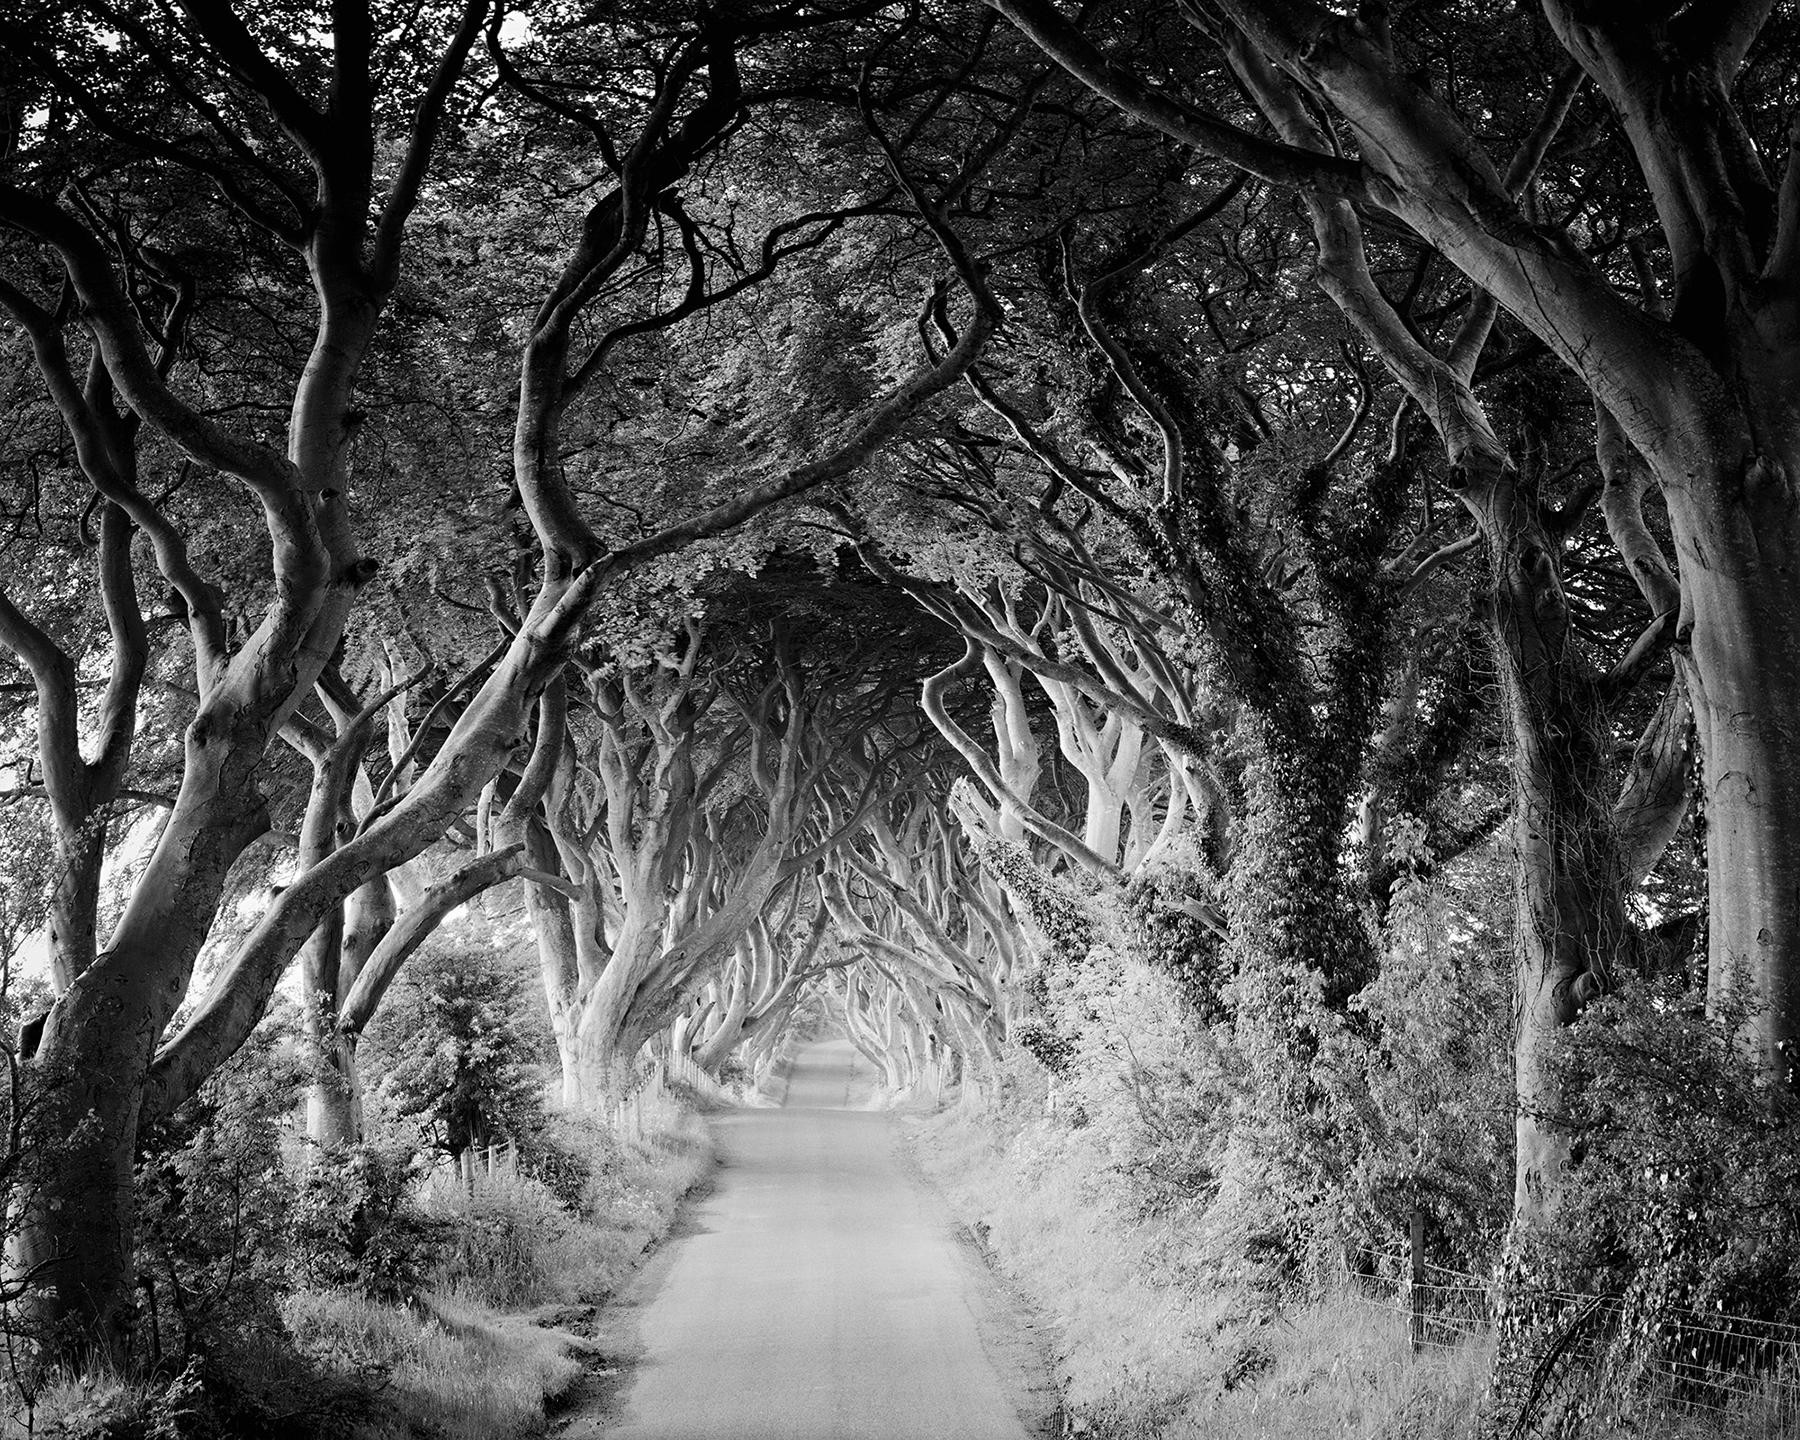 Gerald Berghammer Black and White Photograph - Dark Hedges, beech, trees, Ireland, black and white art landscape photography